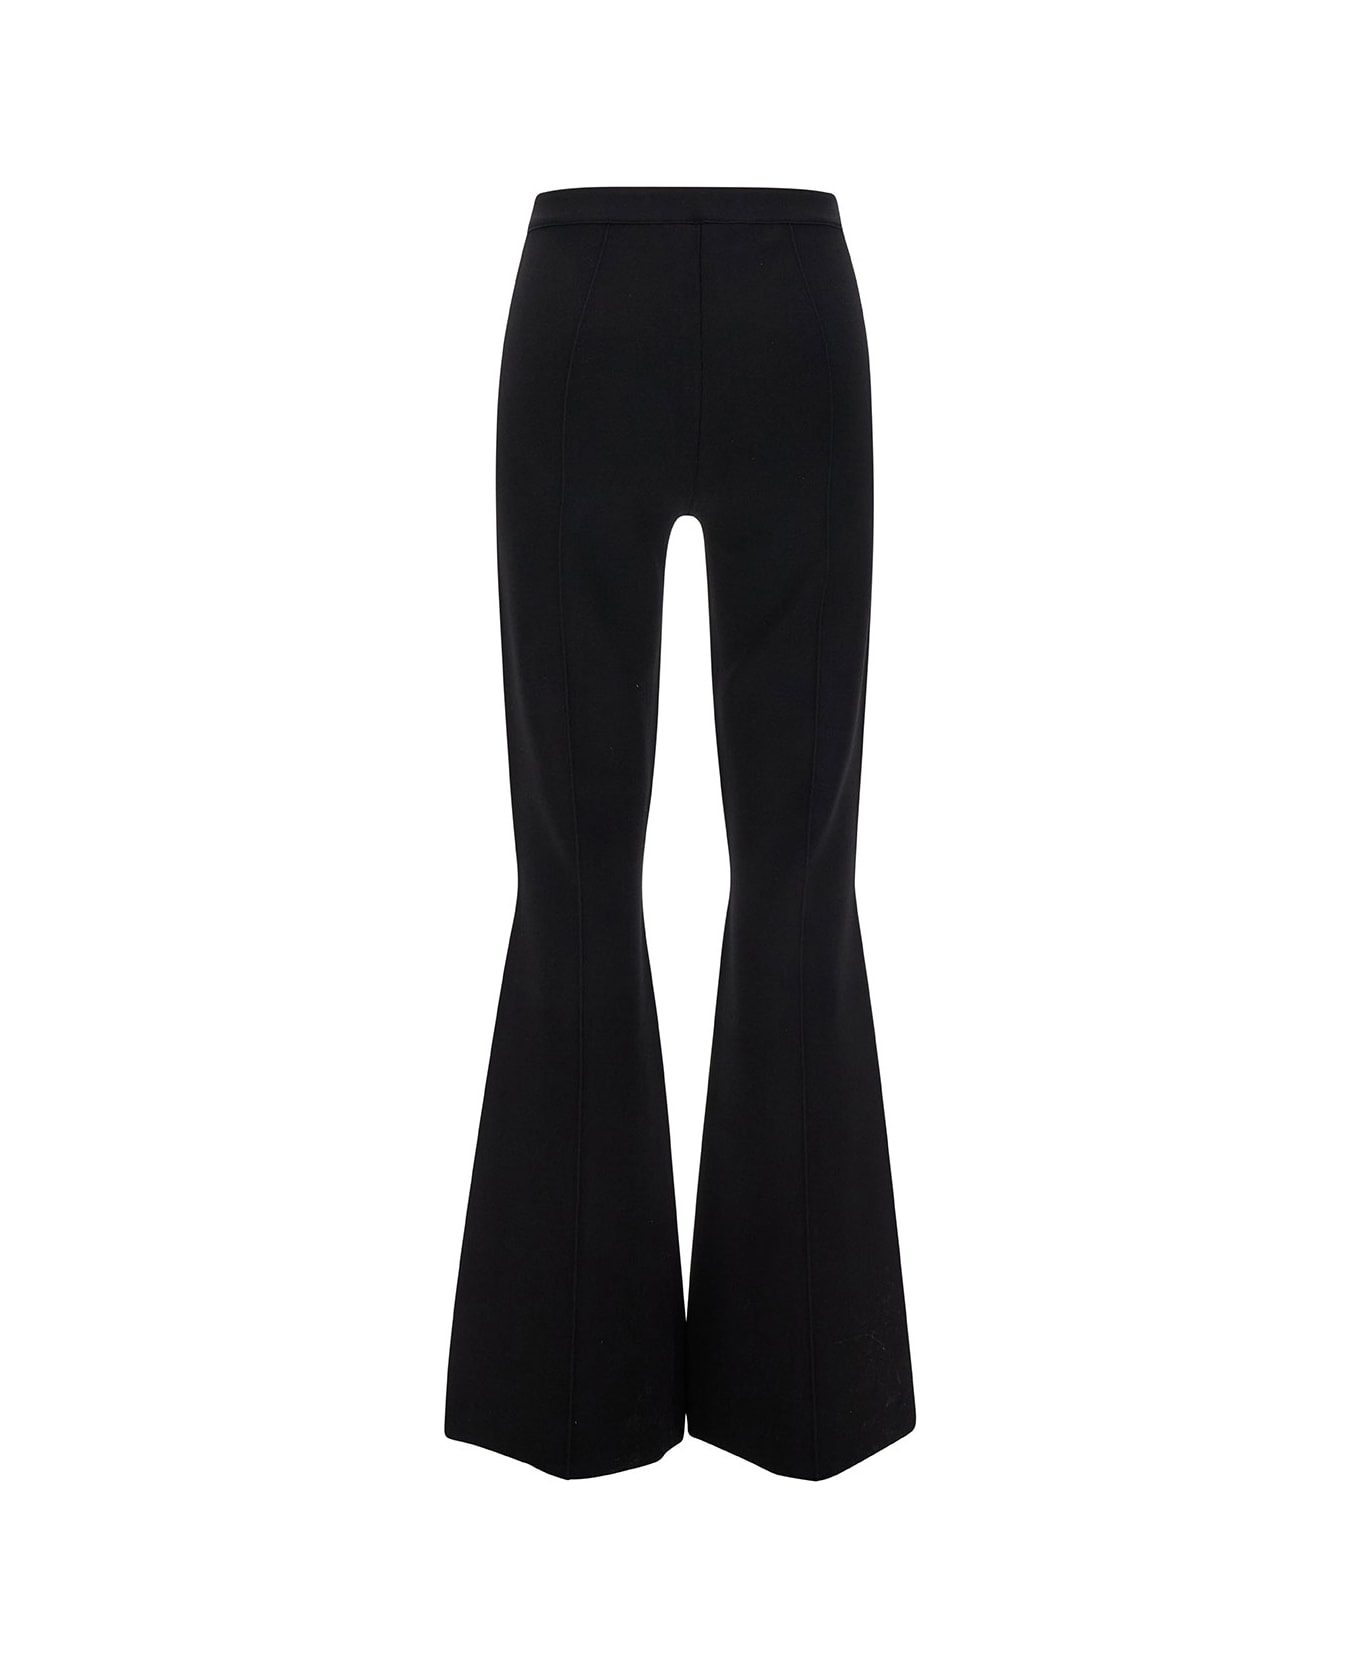 Theory Black Flared Pants With Button Closure In Viscose Blend Woman - Black ボトムス